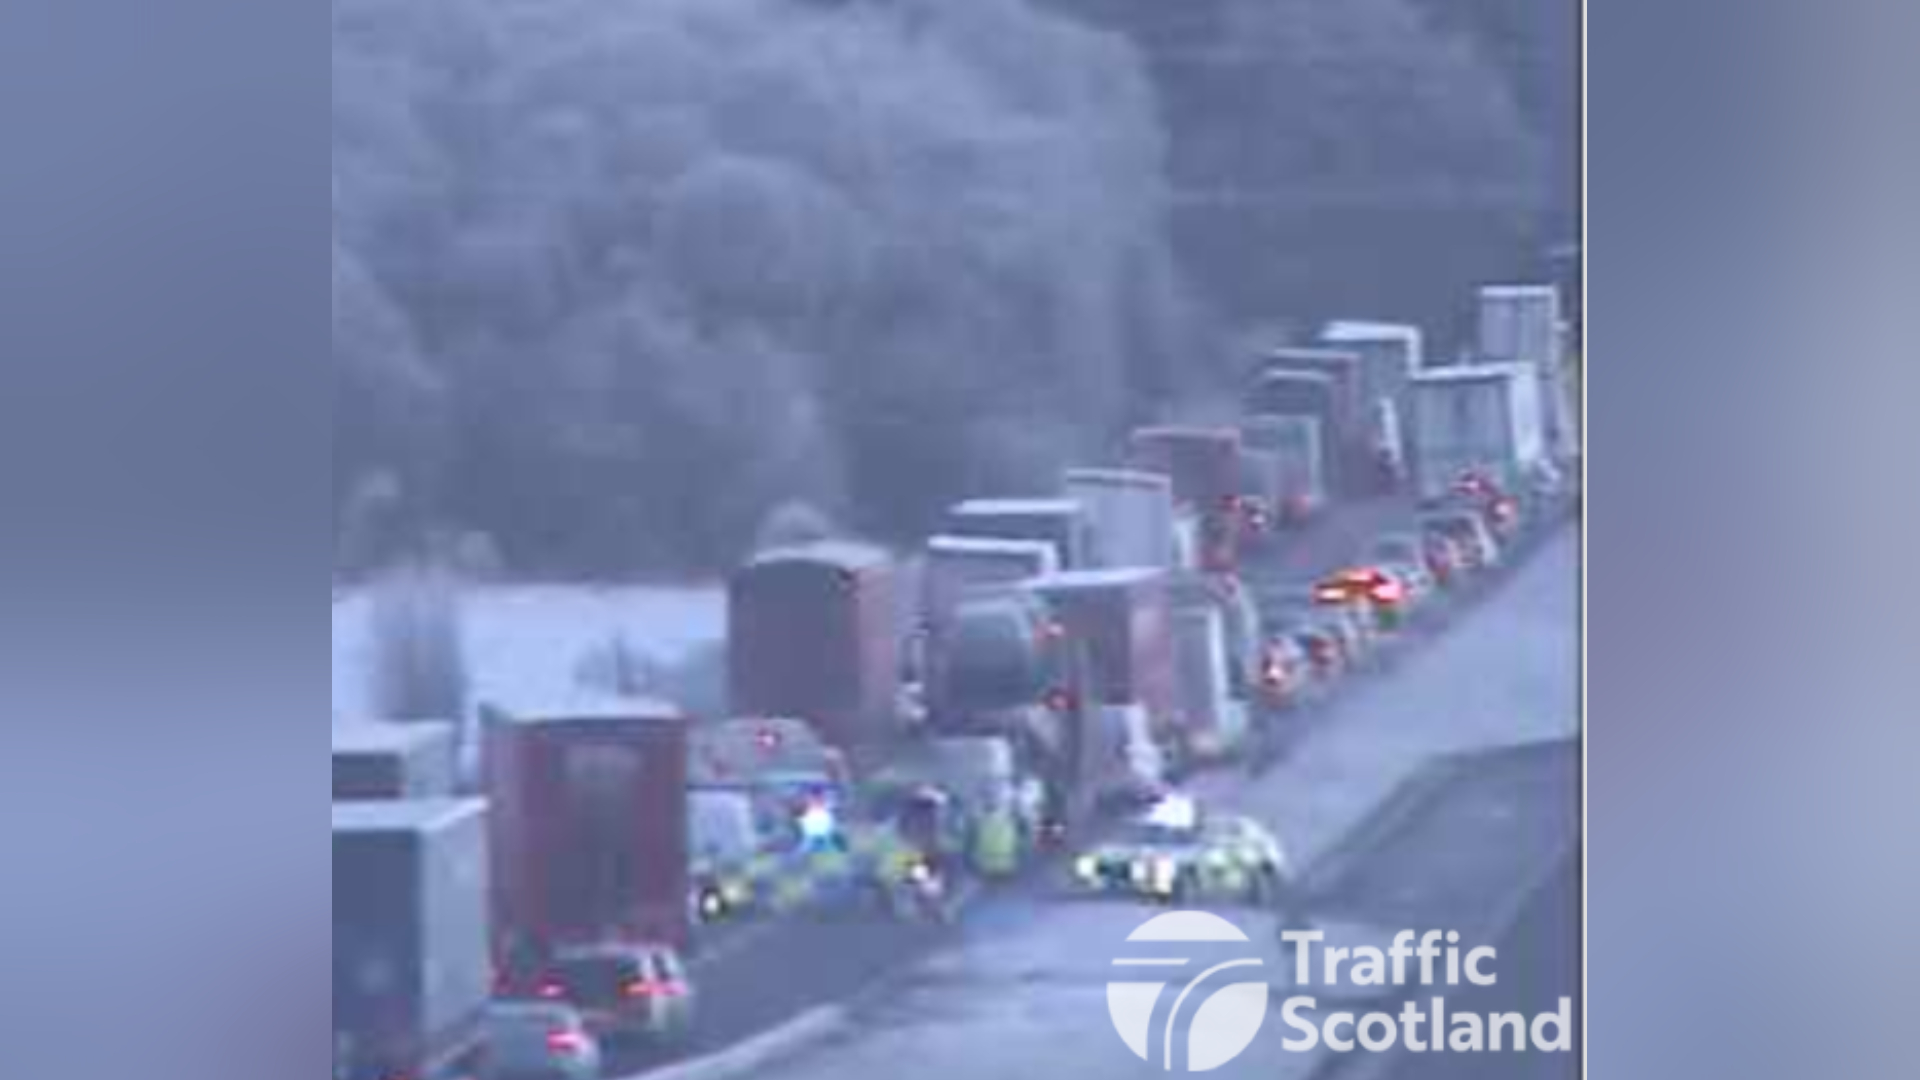 Traffic Scotland issued images of the crash on the A9